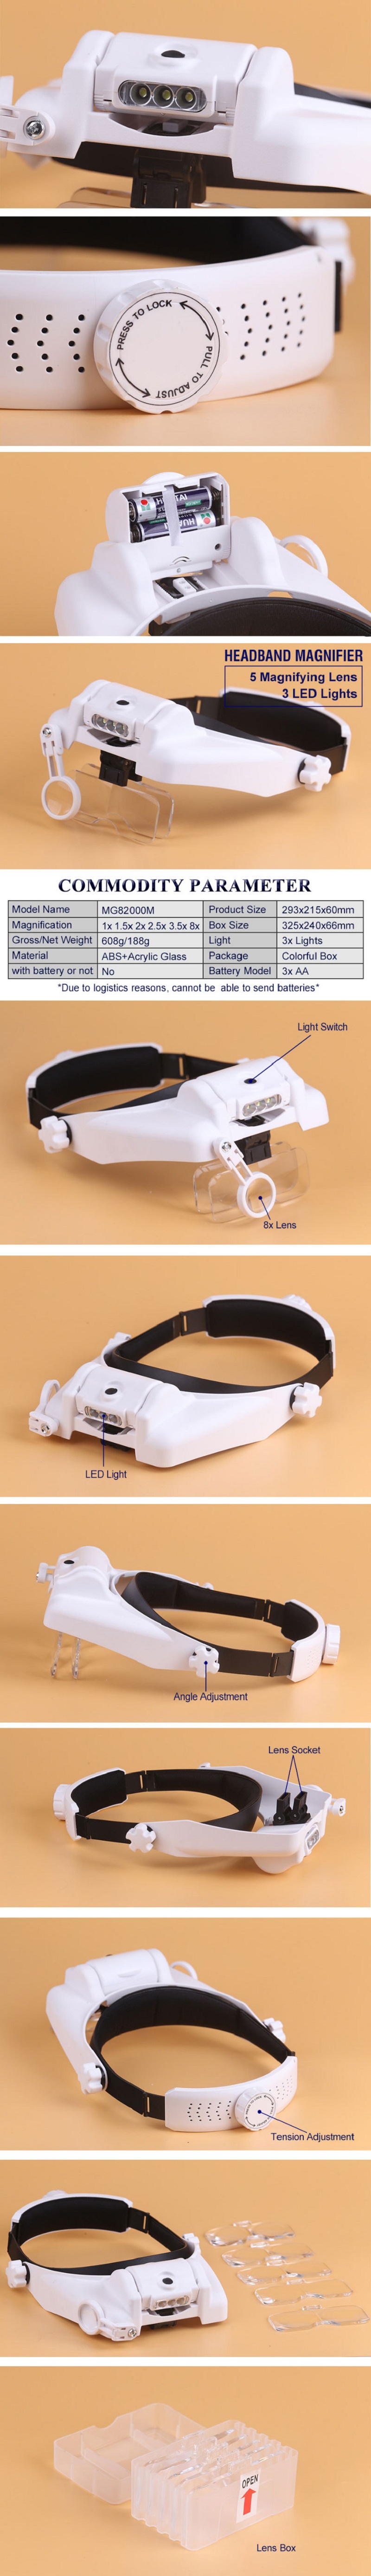 82000M-Headband-Magnifier-Multi-functional-Loupe-Led-Head-Mounted-Magnifying-Glass-With-5-Replaceabl-1700448-5